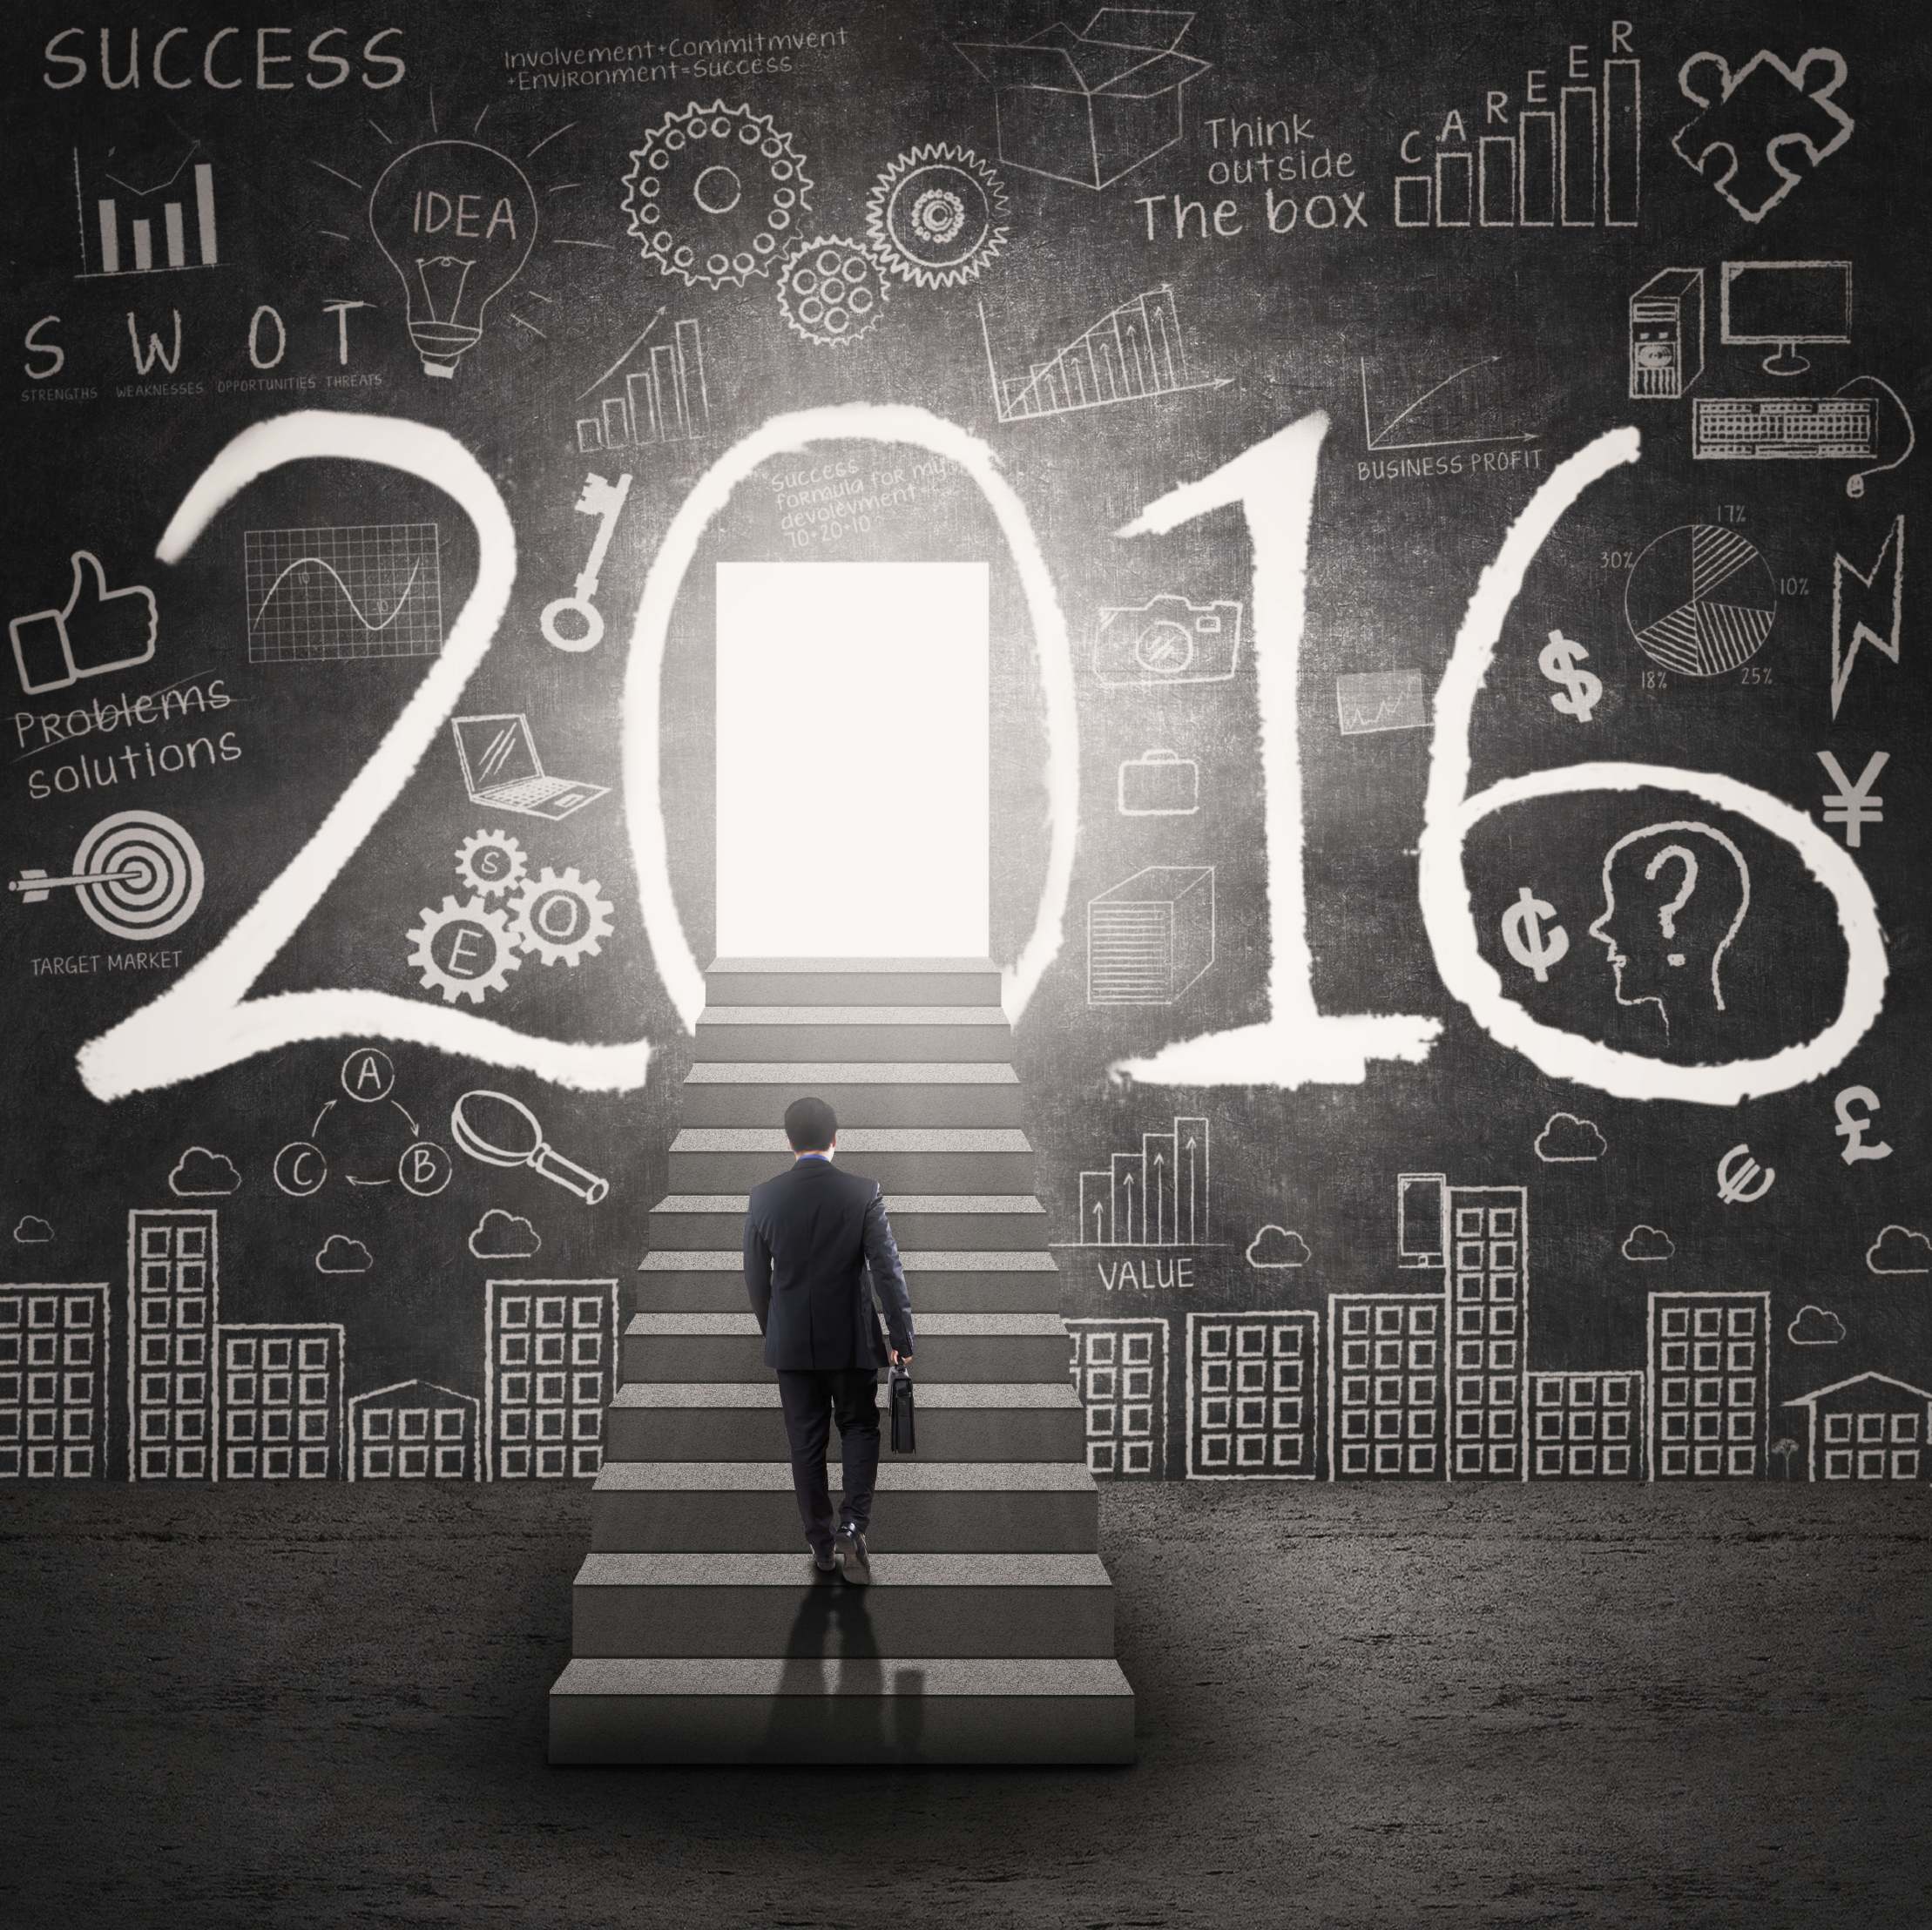 5 Factors Financial Advisors Should Consider for Growth in 2016 and Beyond